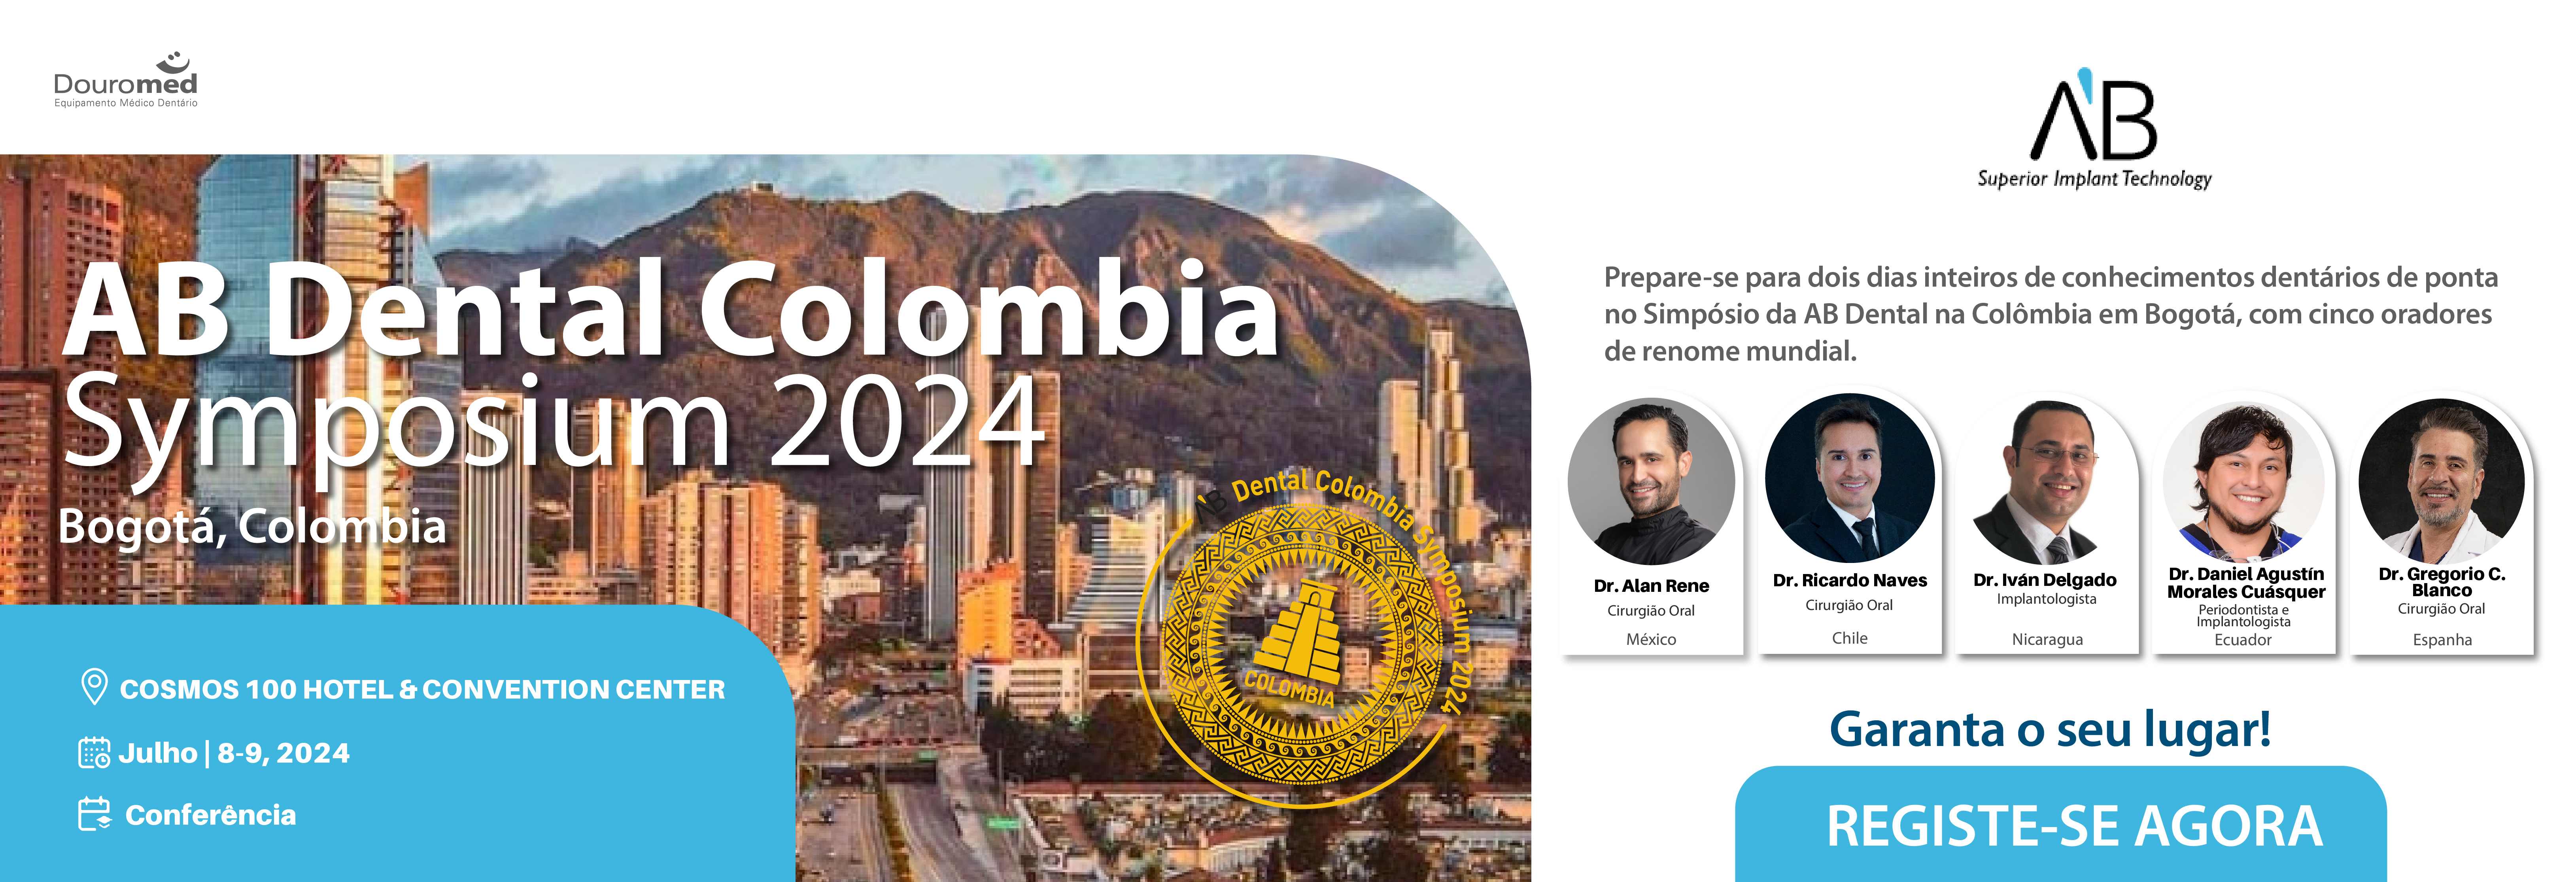 banner-symposium-colombia-2024